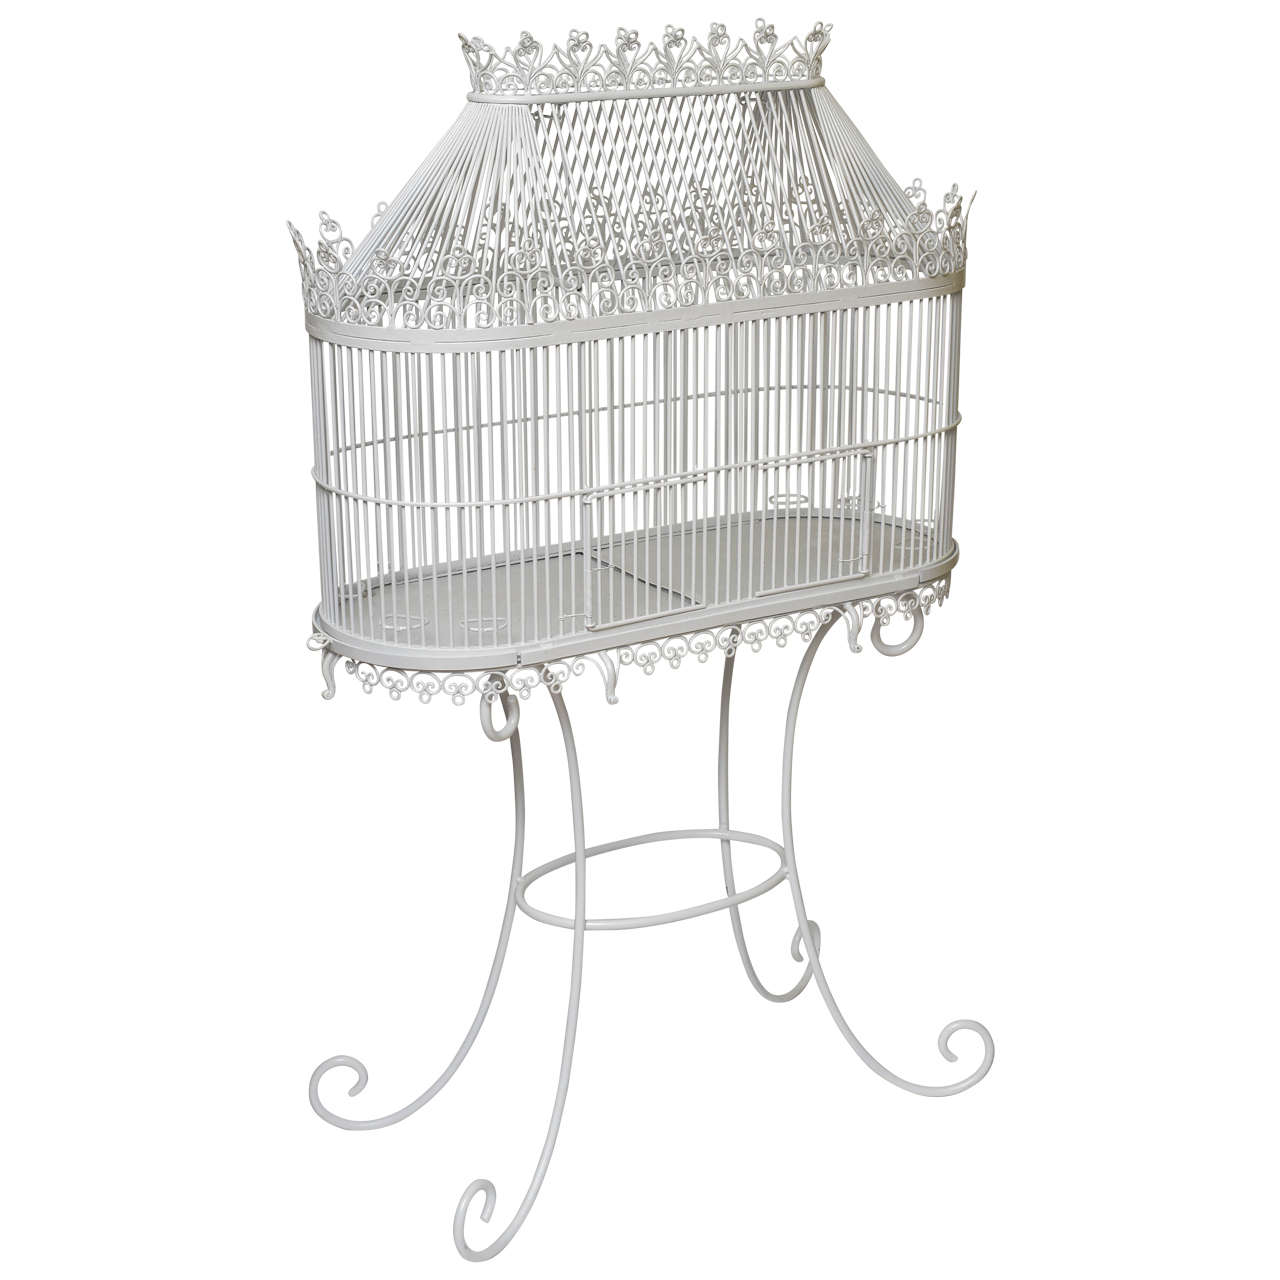 19th Century Elaborate French Birdcage on Stand